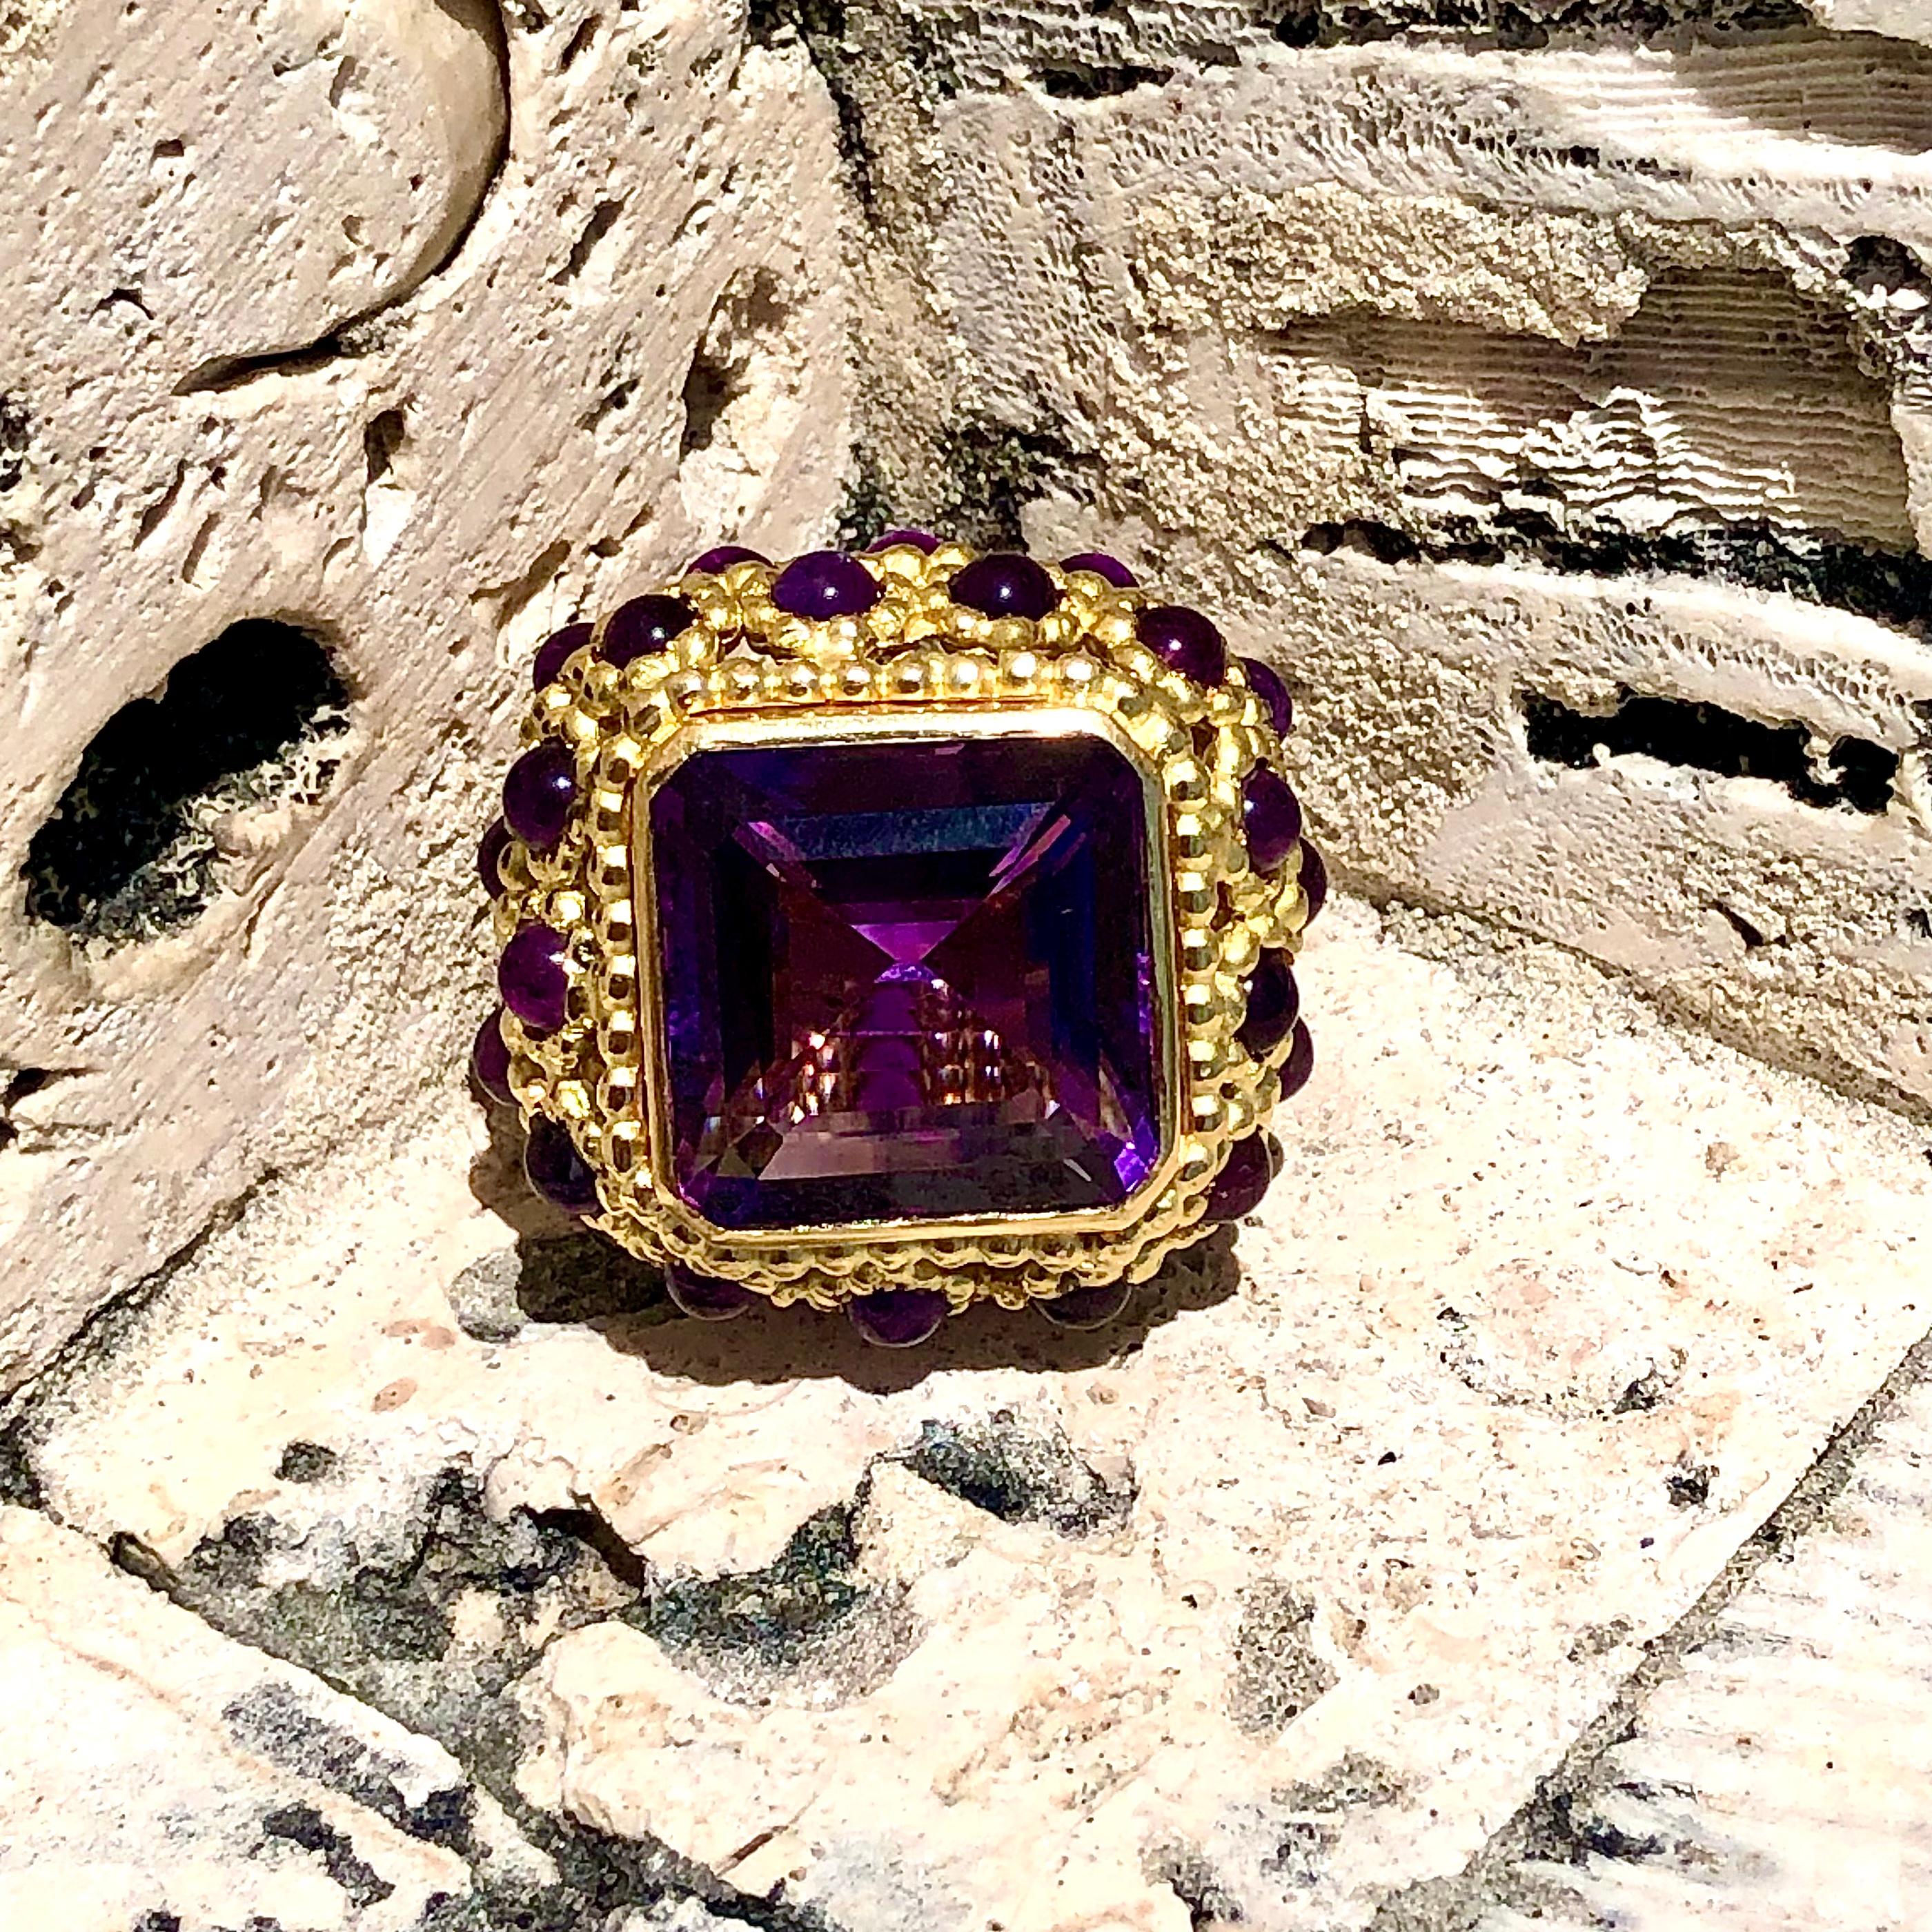 Elegant Grand Scale French Mid-20th Century 18k Gold and Amethyst Fashion Ring For Sale 1